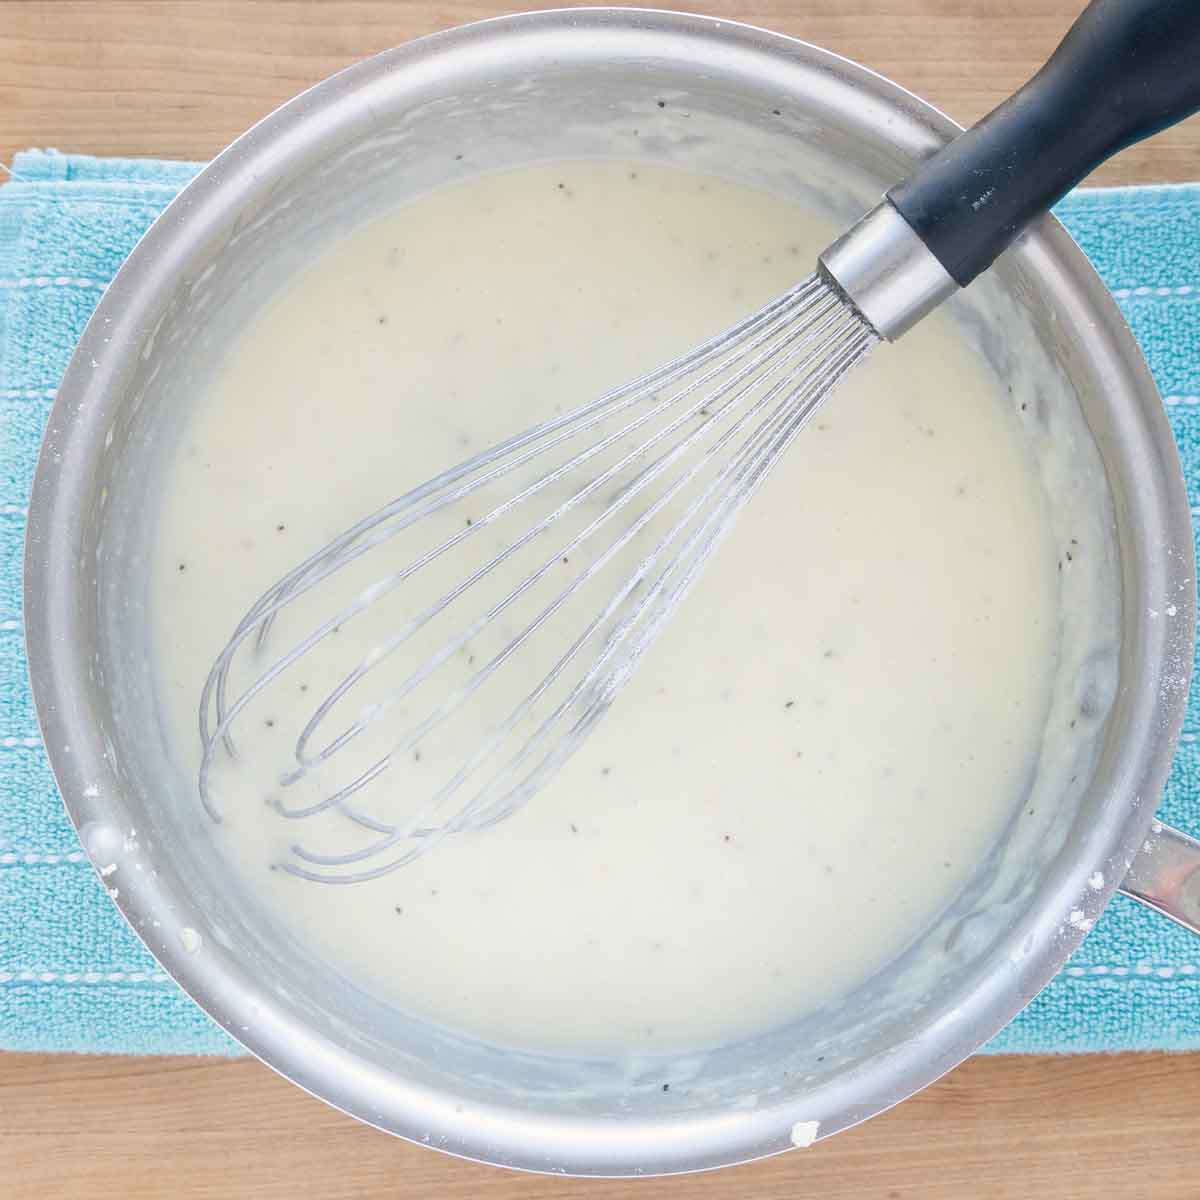 finished bechamel sauce in the pot with a wire whisk